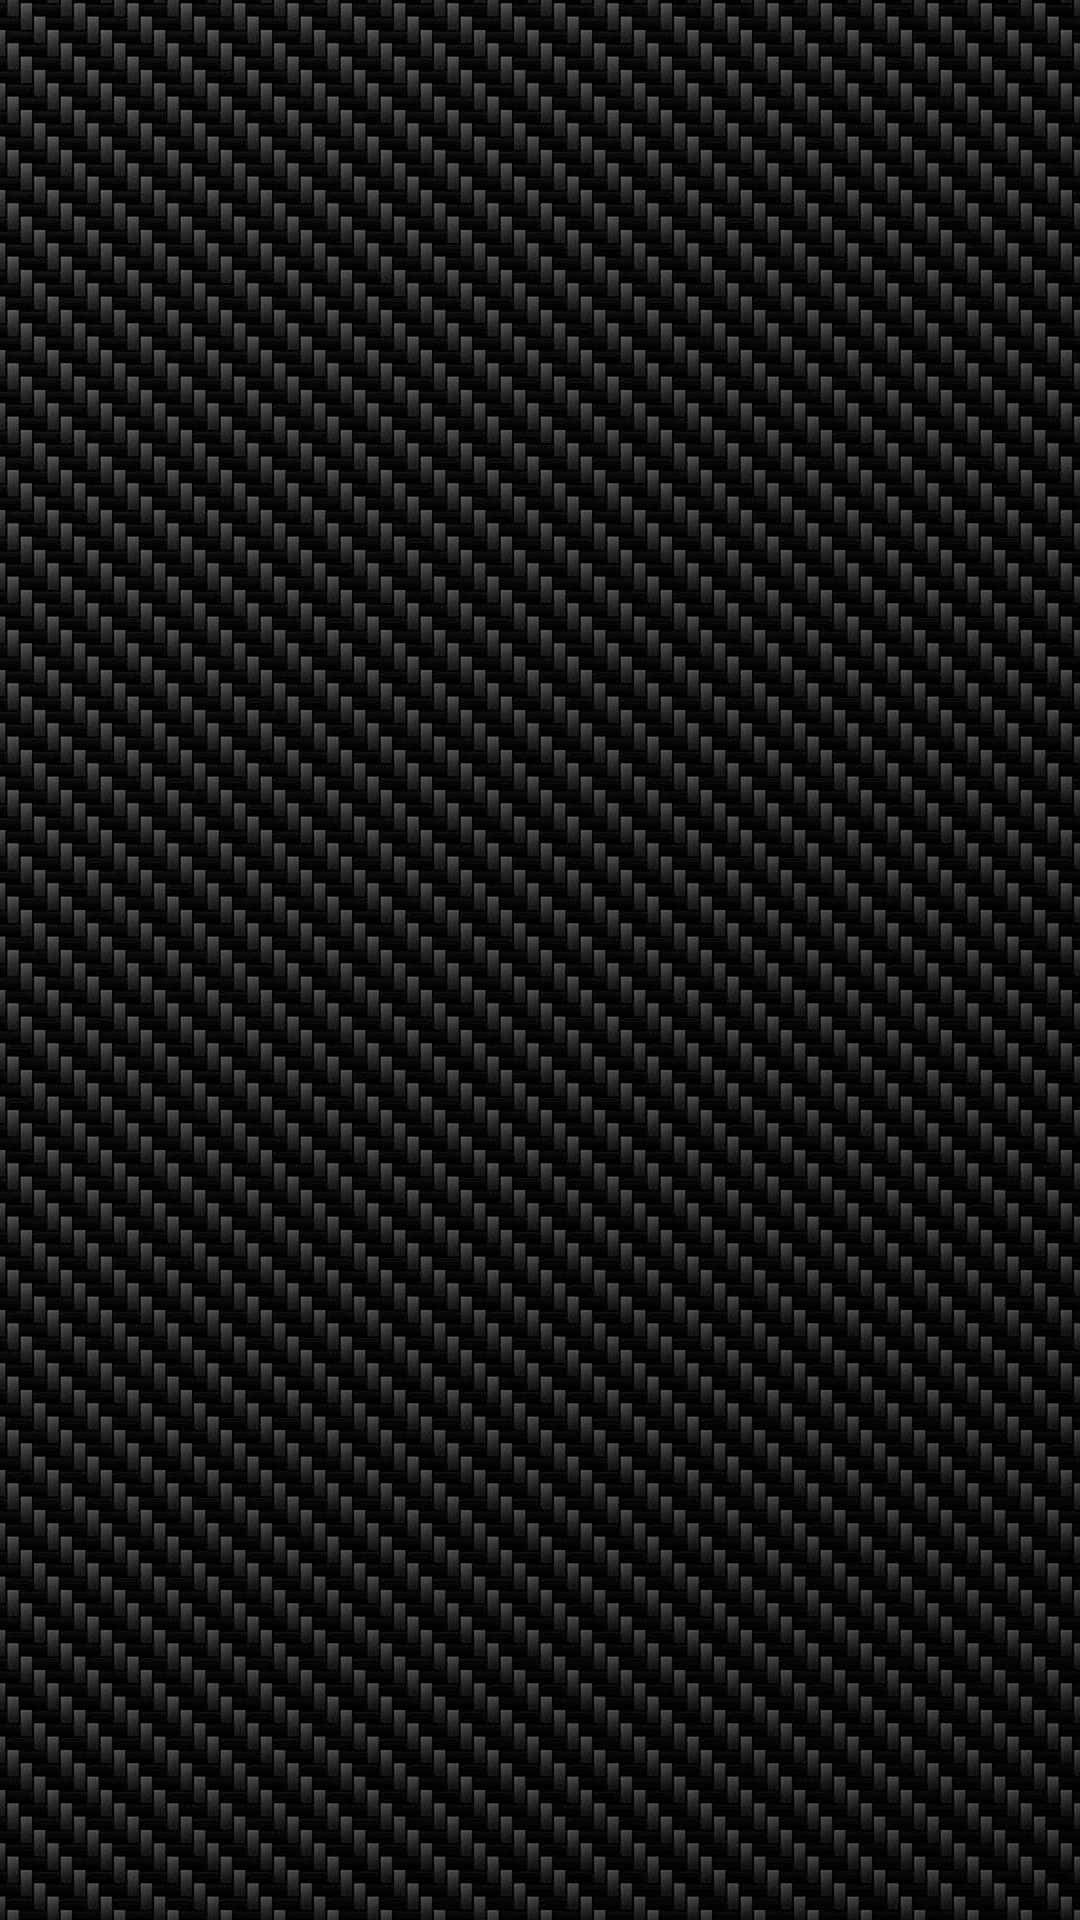 The Durable and Stylish Black Carbon Fiber Wallpaper